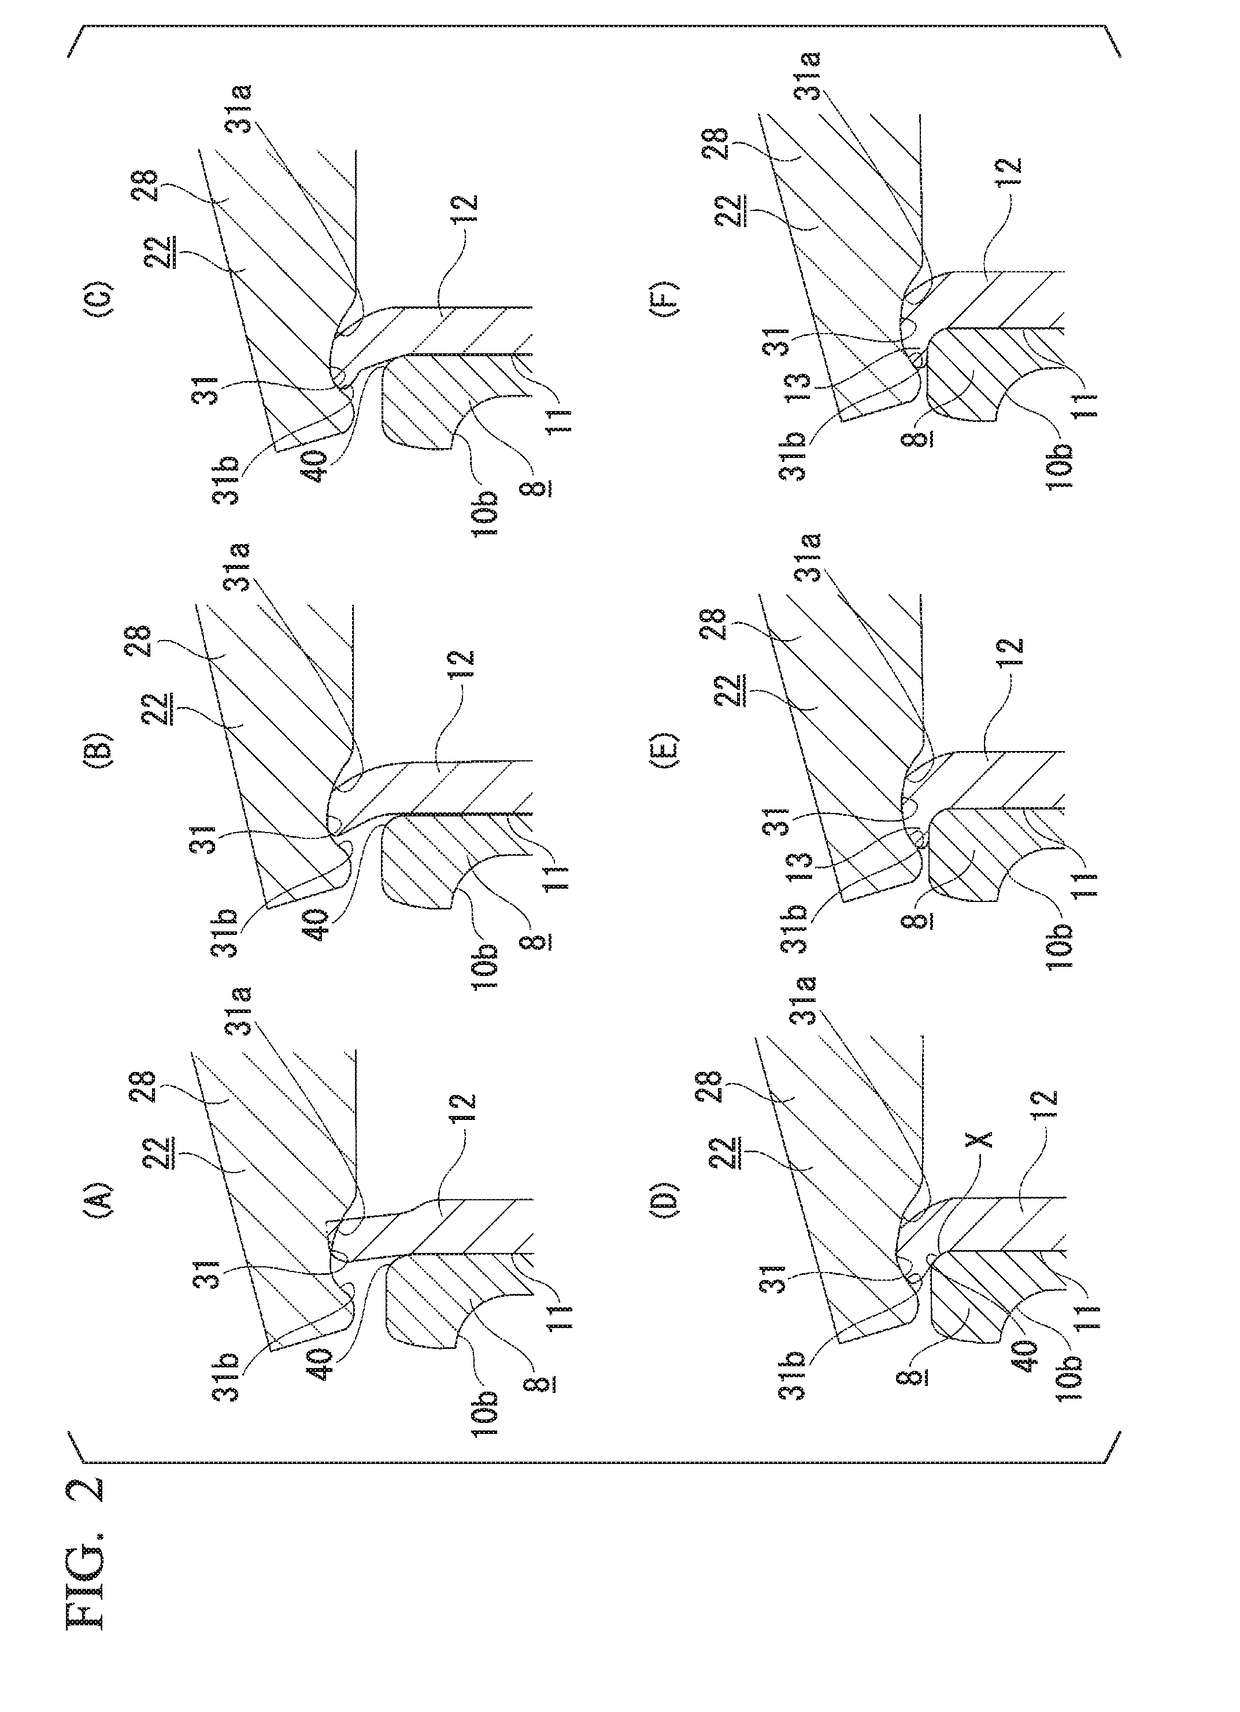 Manufacturing method for rolling bearing units for wheel support